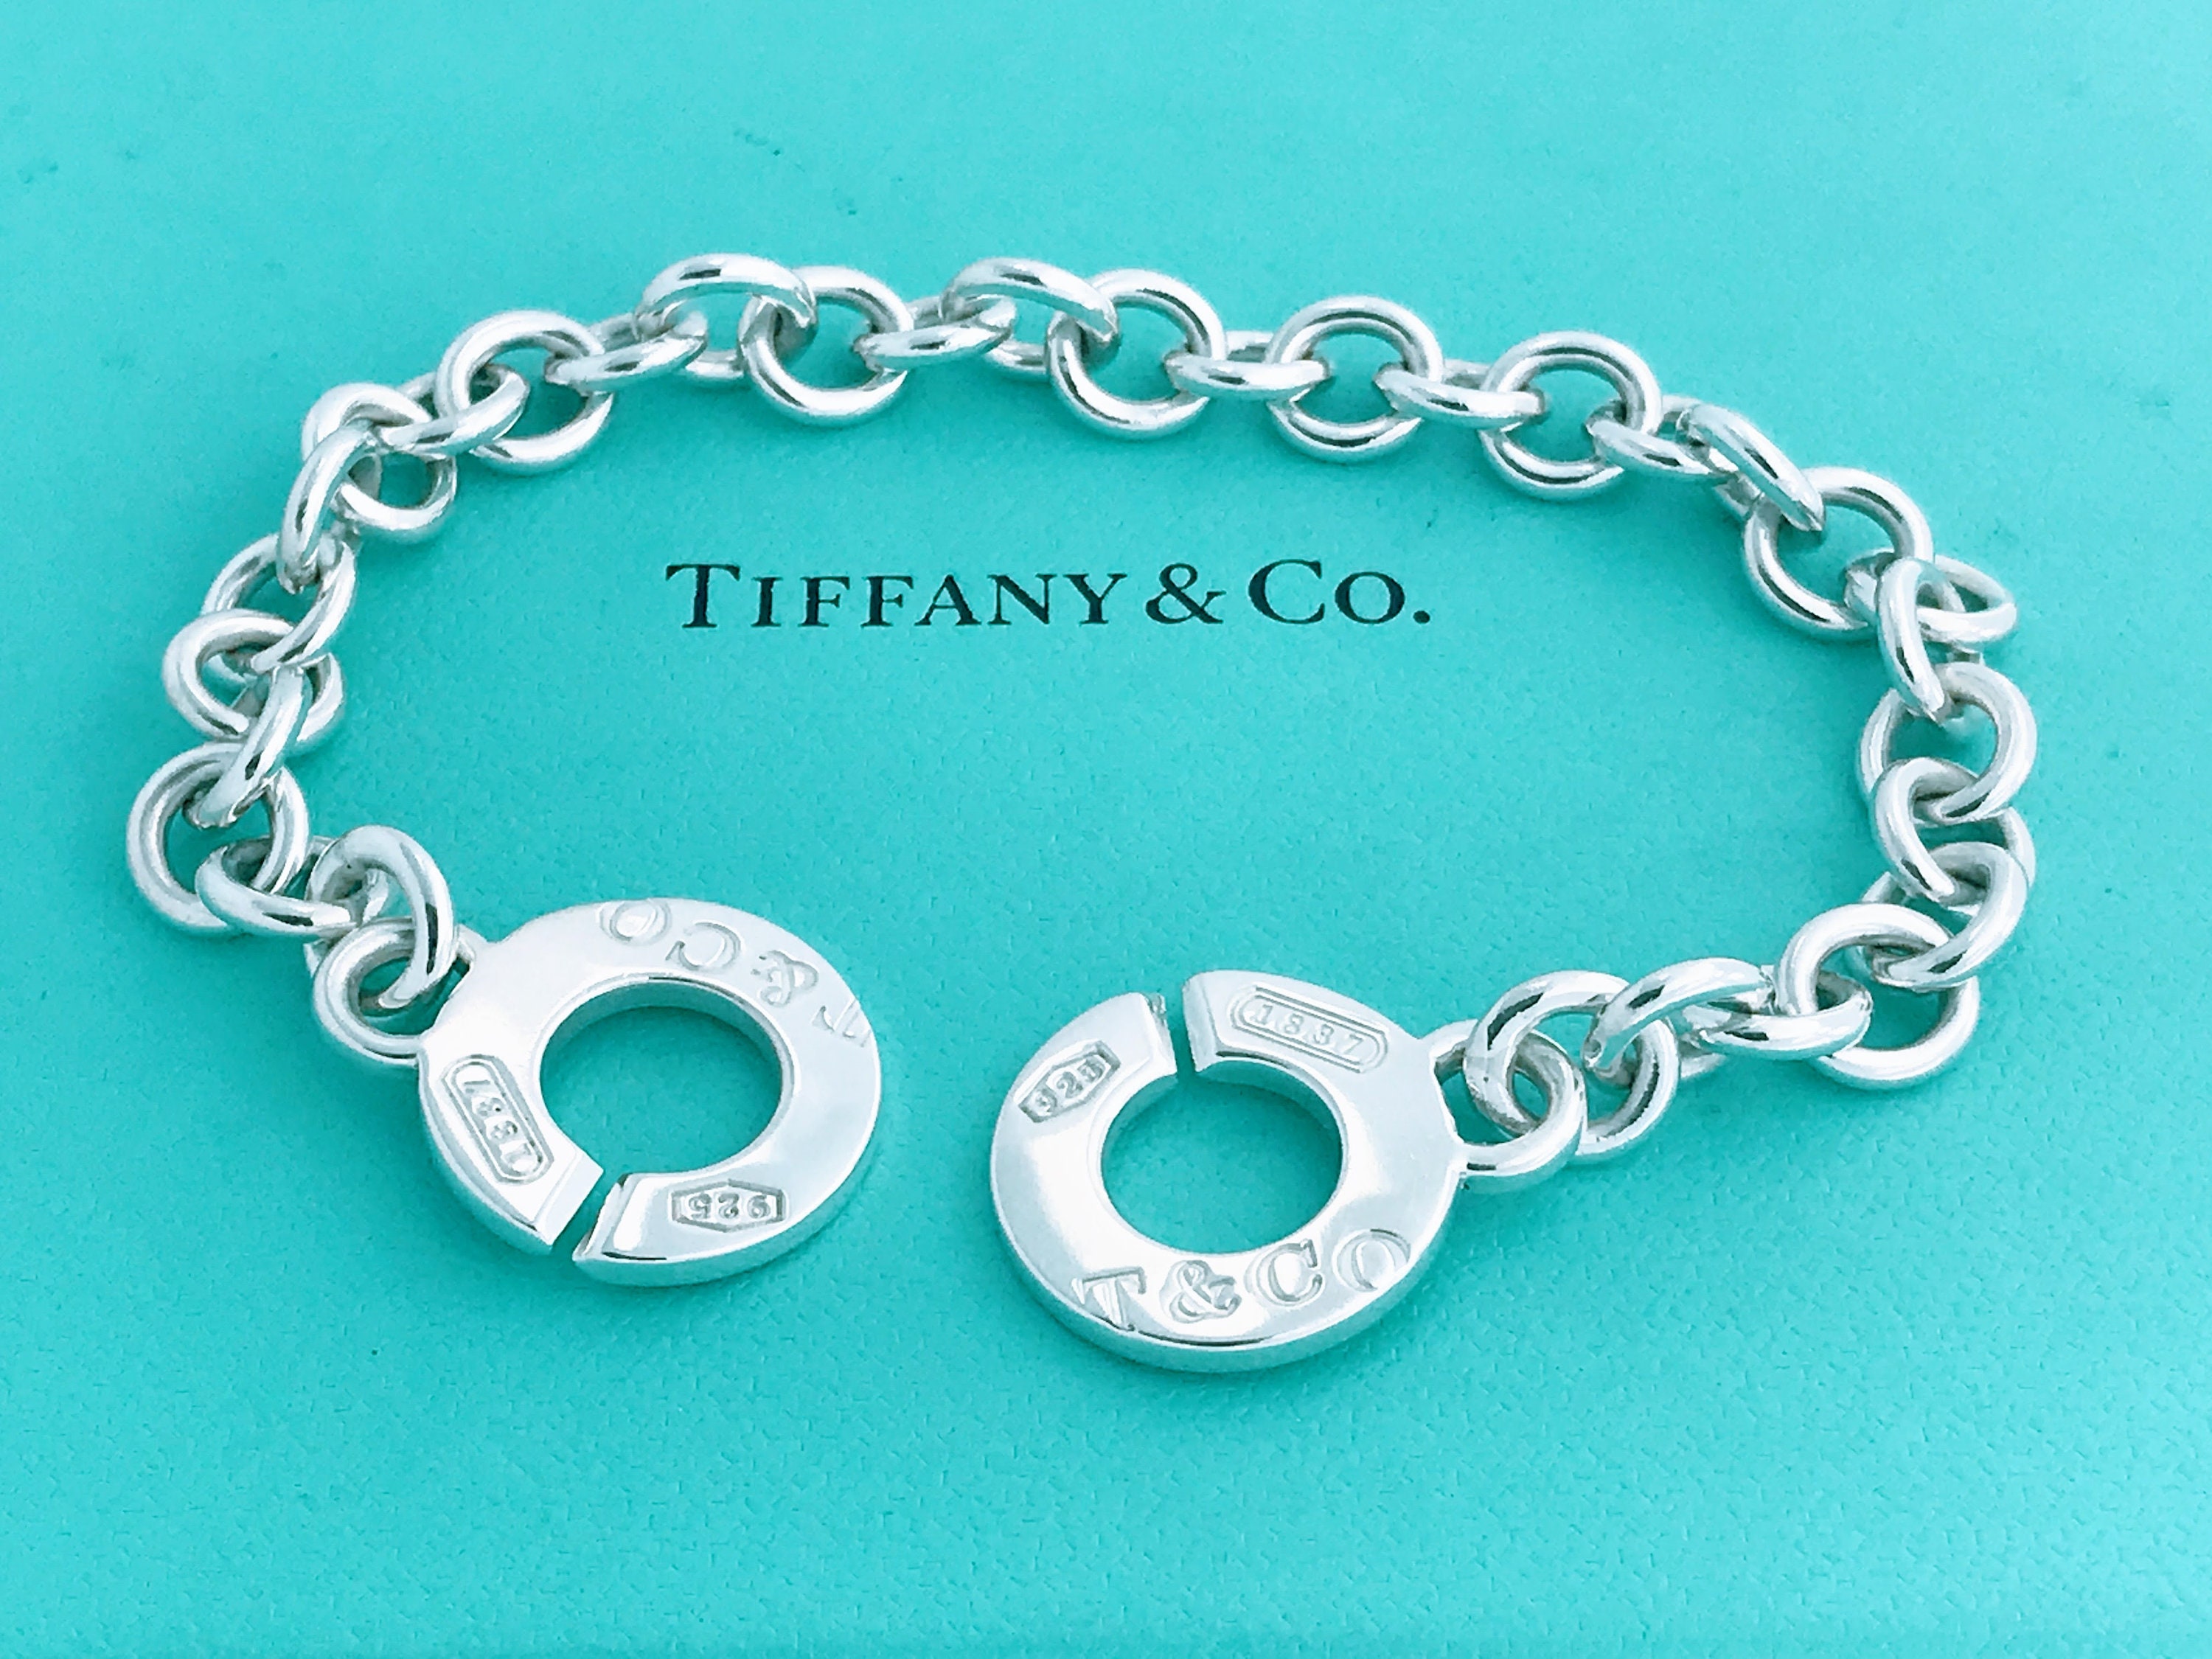 Tiffany & Co 1837 Interlocking Circles Sterling Silver Bracelet, Authentic  Tiffany Co 925 Silver Double Circle Clasp Toggle Bracelet Bangle -   Canada